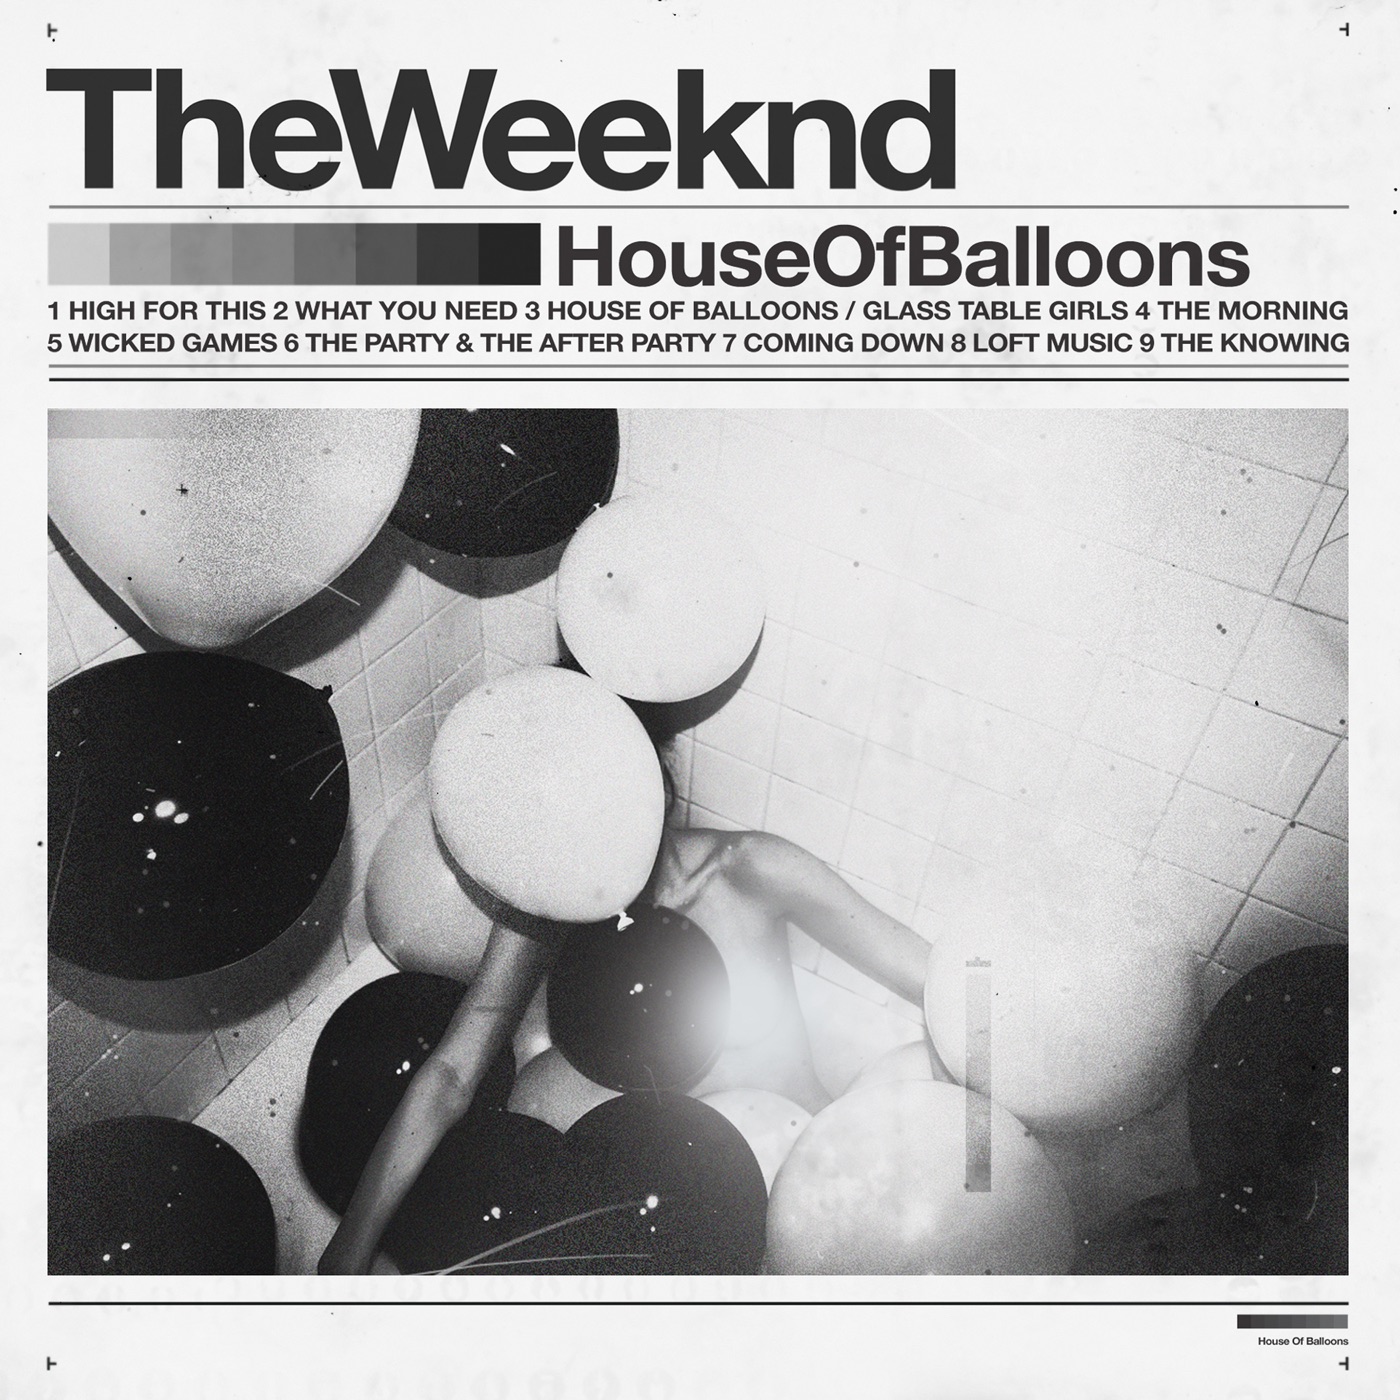 House Of Balloons (Original) by The Weeknd